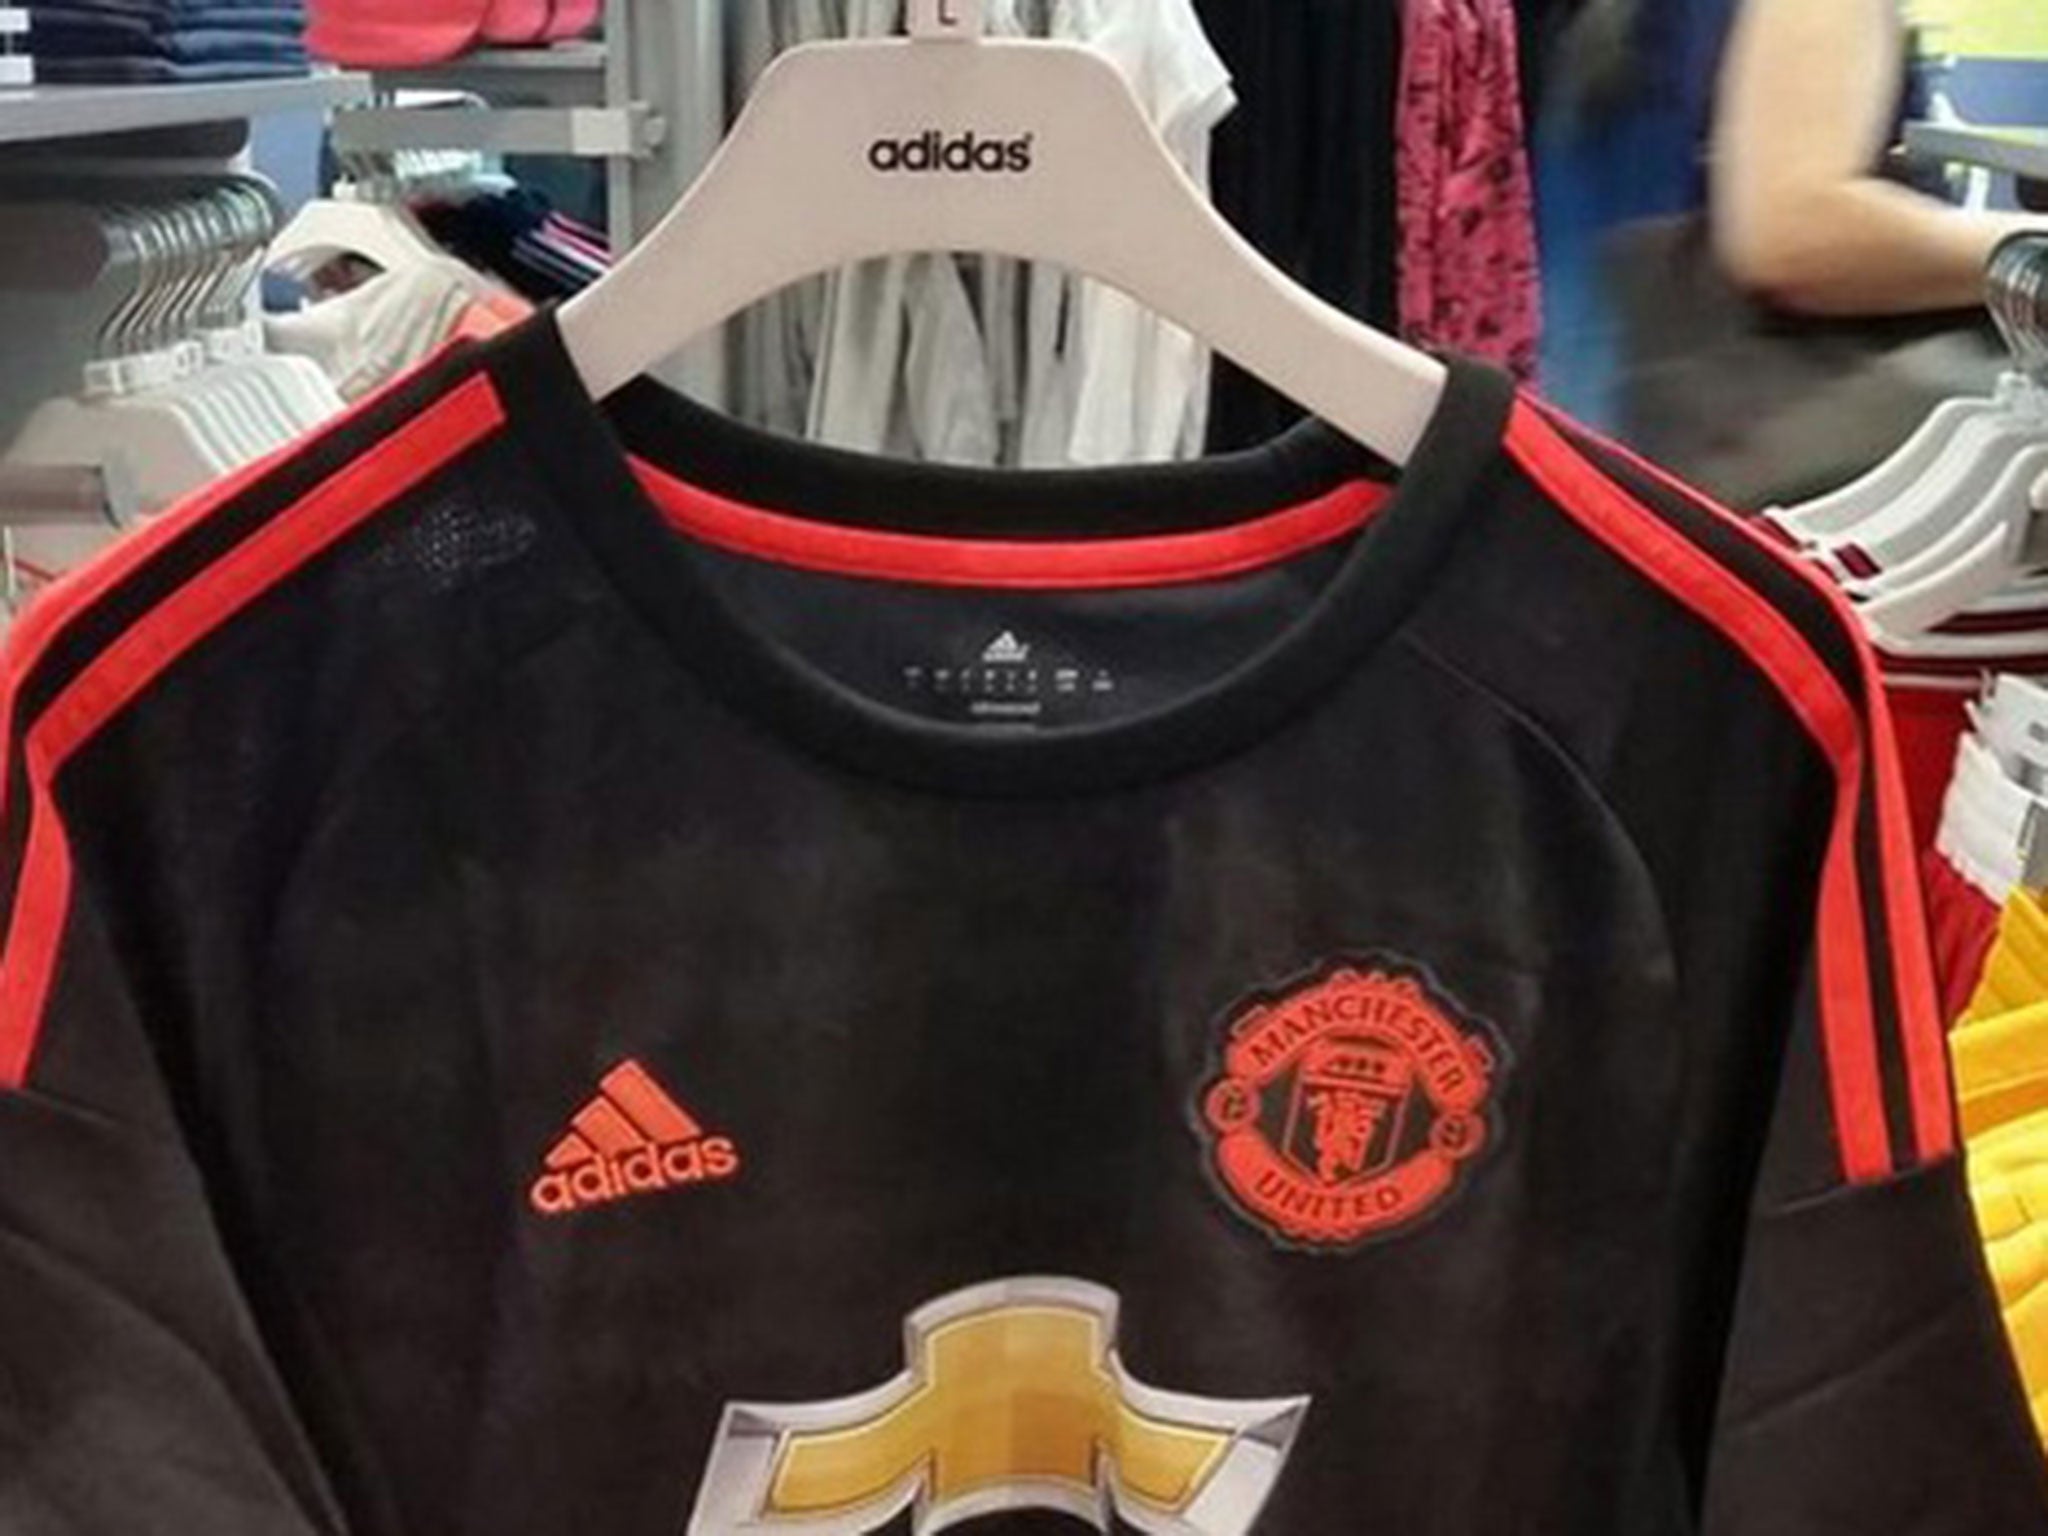 Manchester United's new third shirt on sale in Dubai